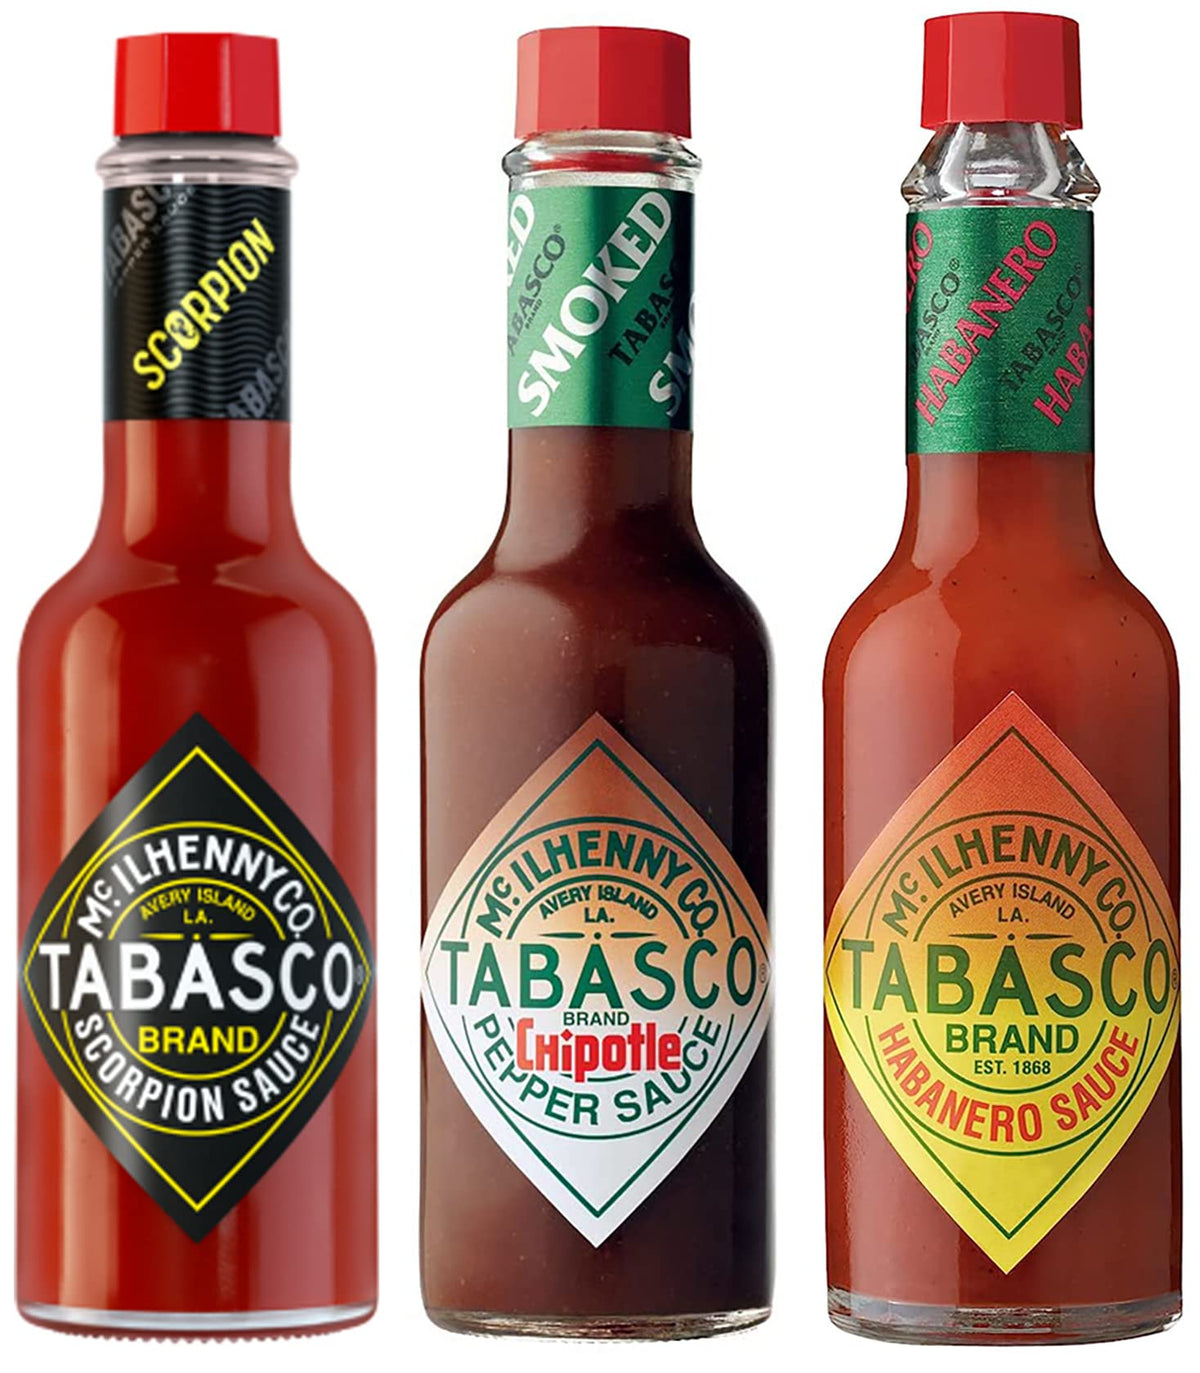 Tabasco Sauce - Hot Sauce Variety Pack 5 Ounce - 3 Pack Chipotle, Scorpion, Habanero Sauce 5 oz - Experience the power of spice with our Tabasco hot sauce trio!